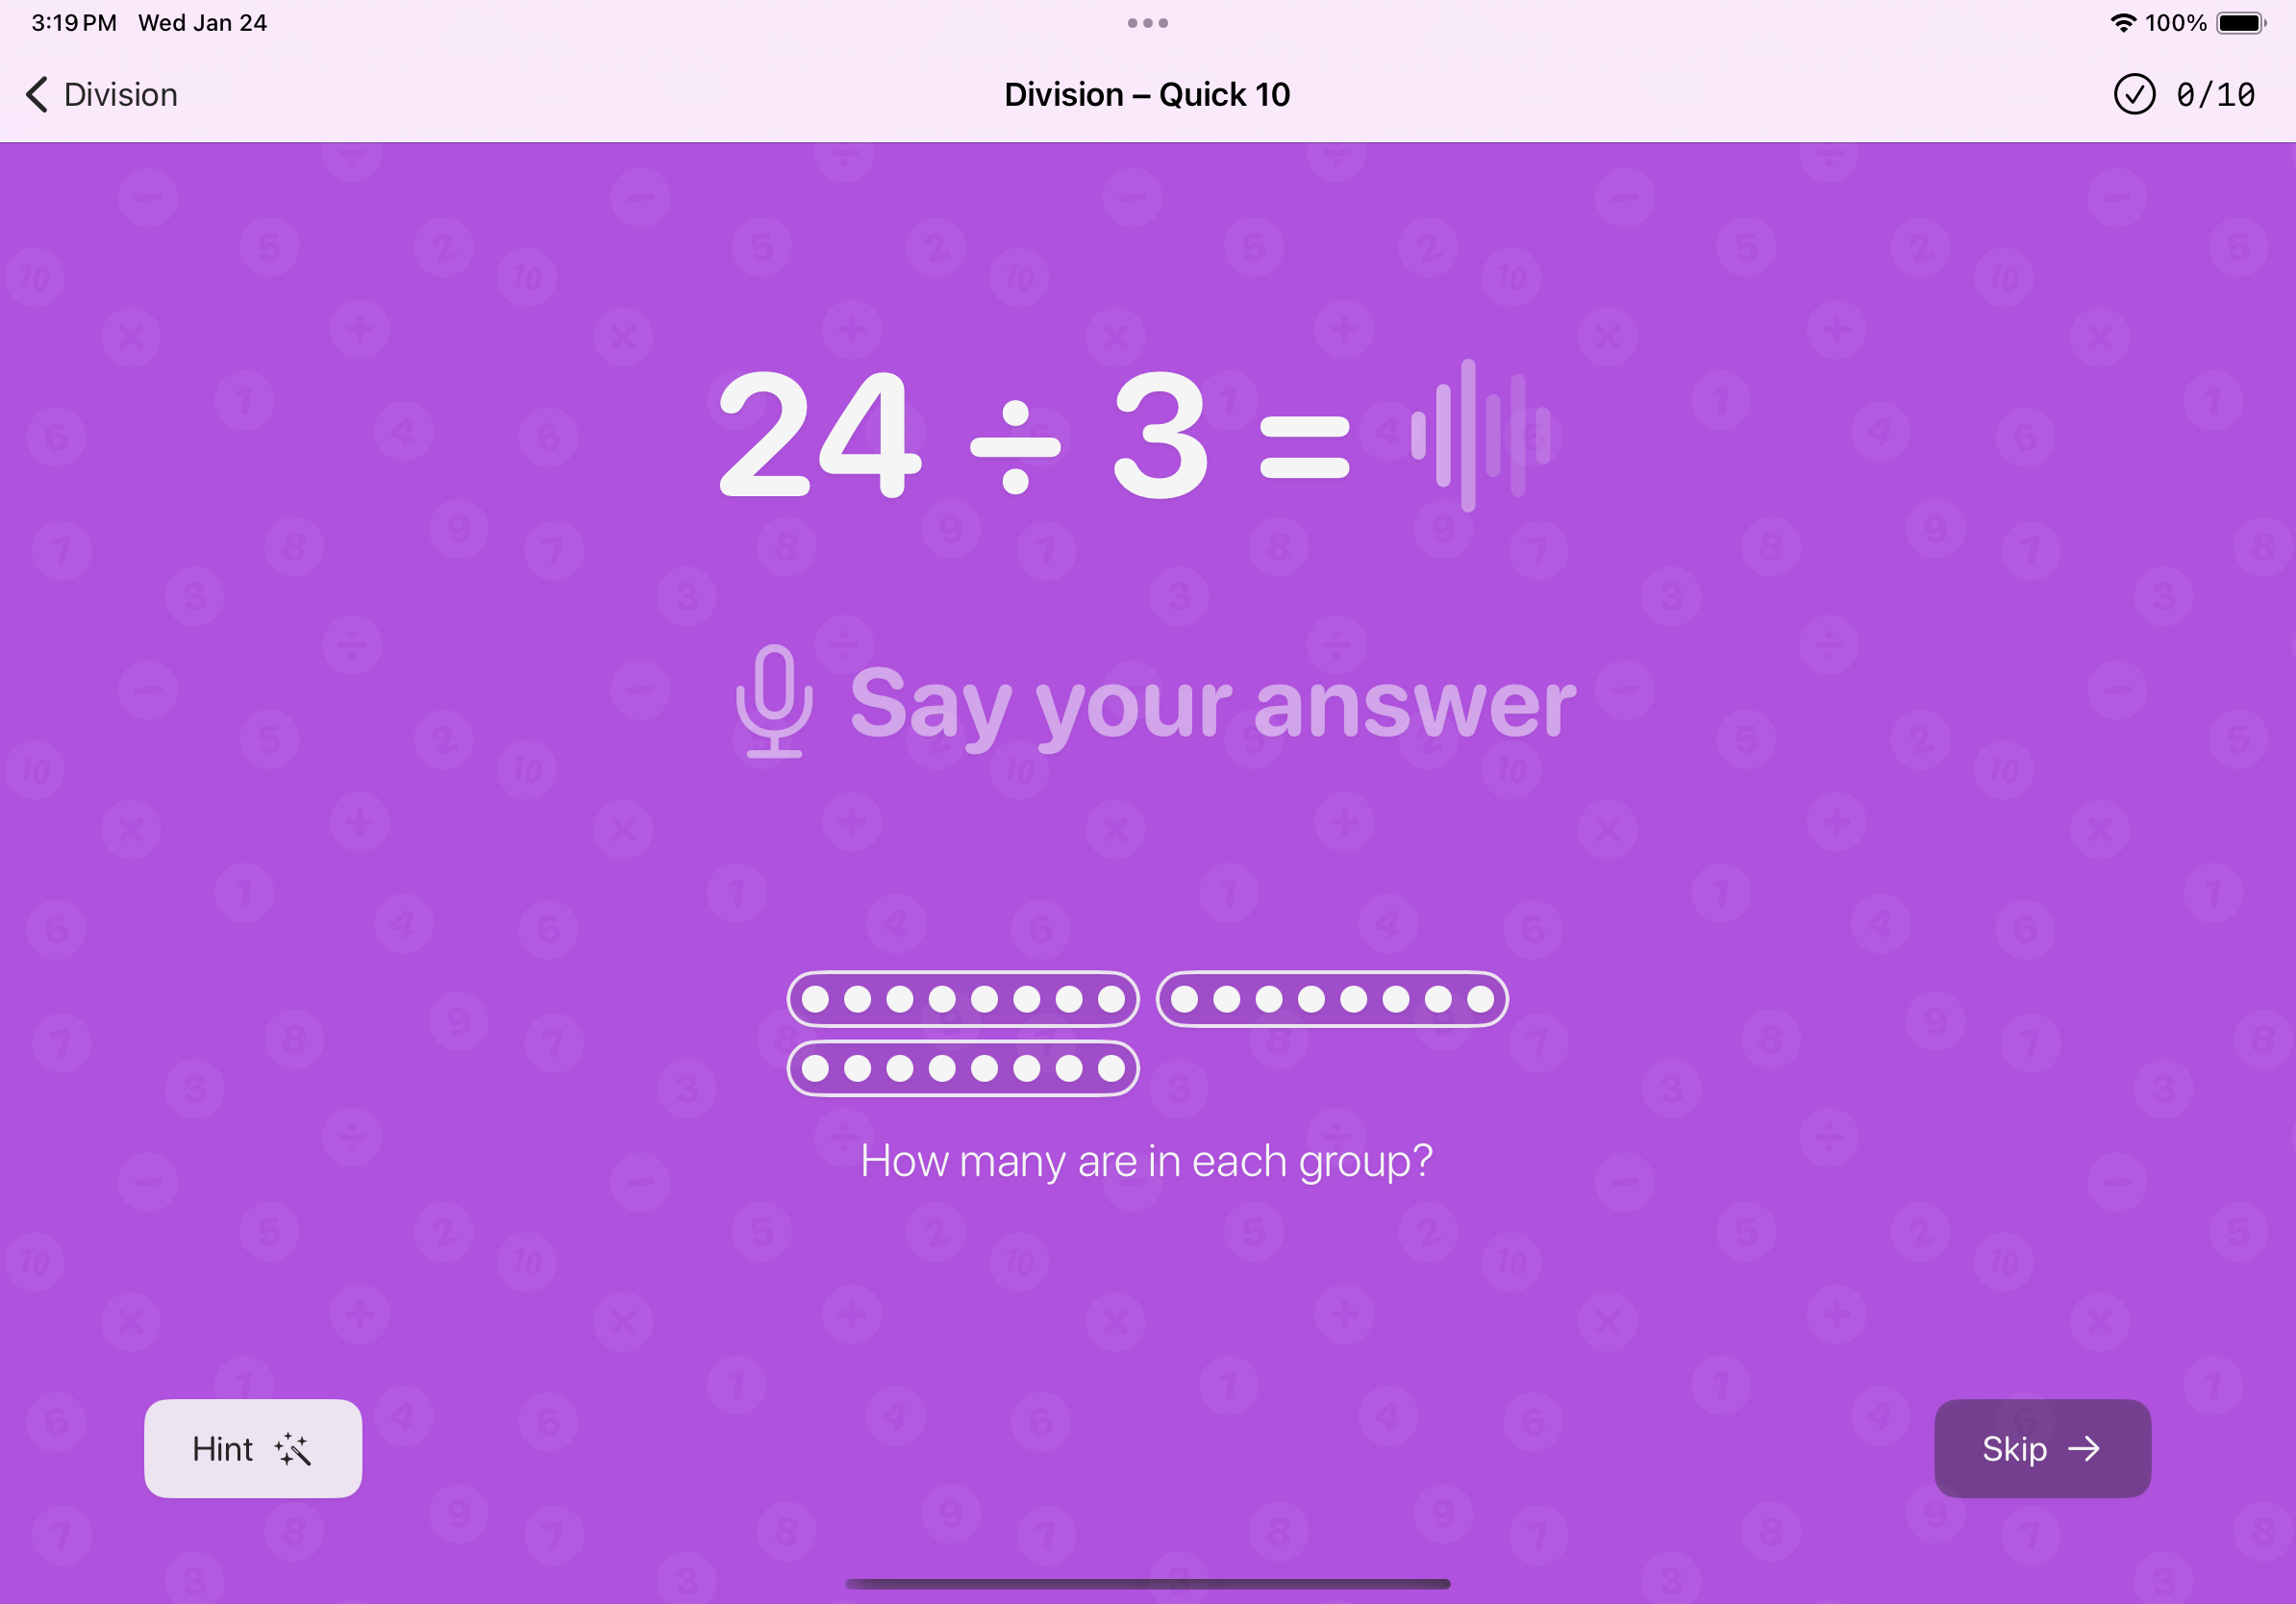 Division practice screen showing a math problem